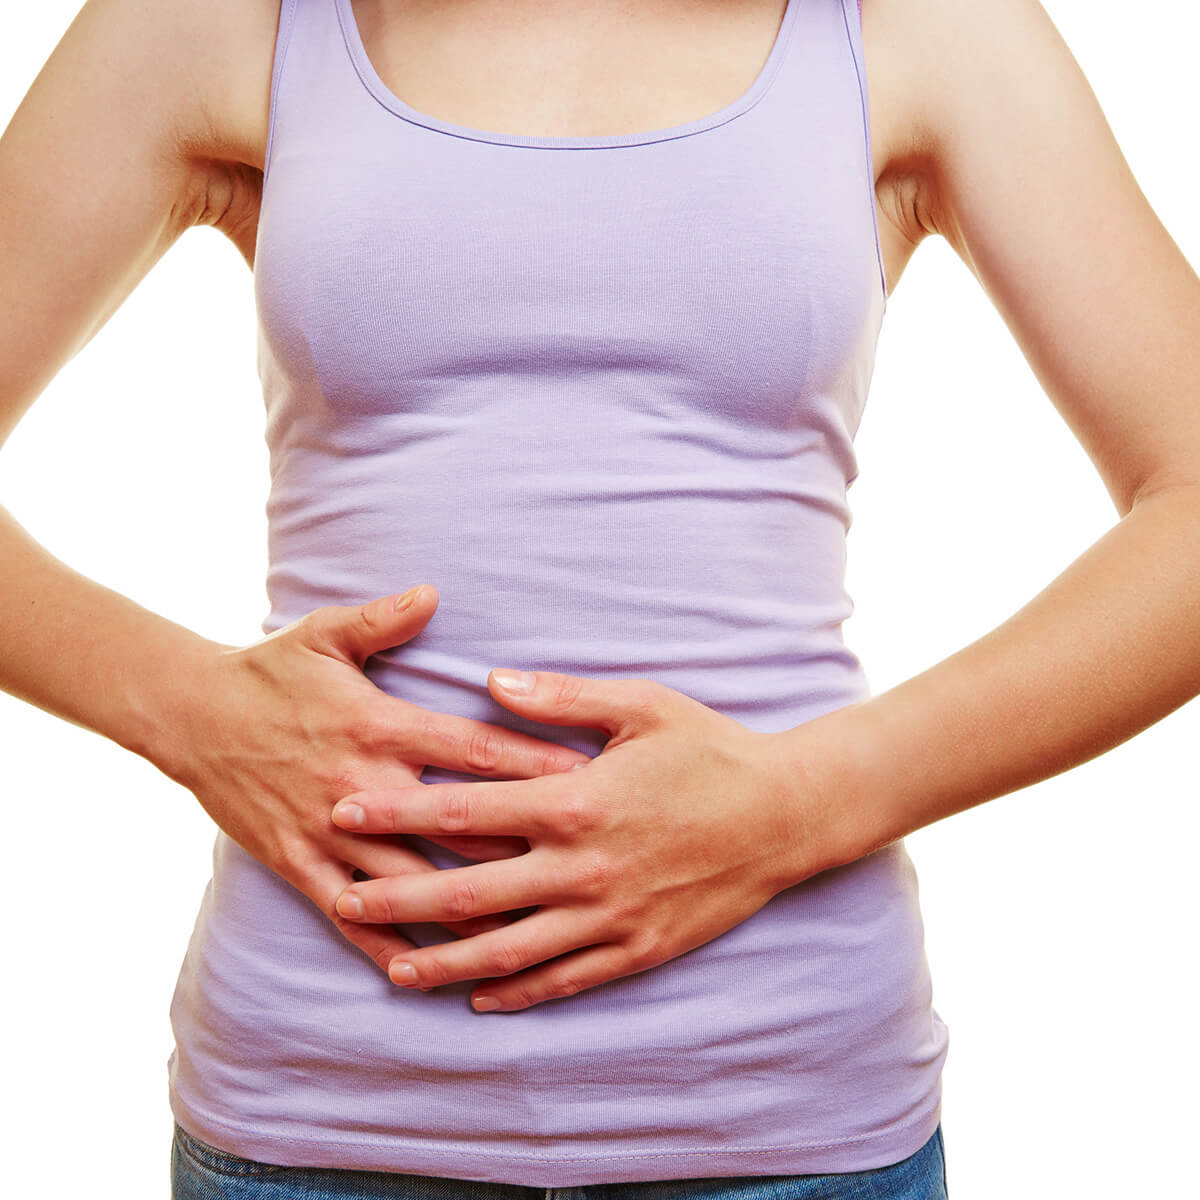 Tips to Reduce Nausea & Vomiting After Bariatric Surgery